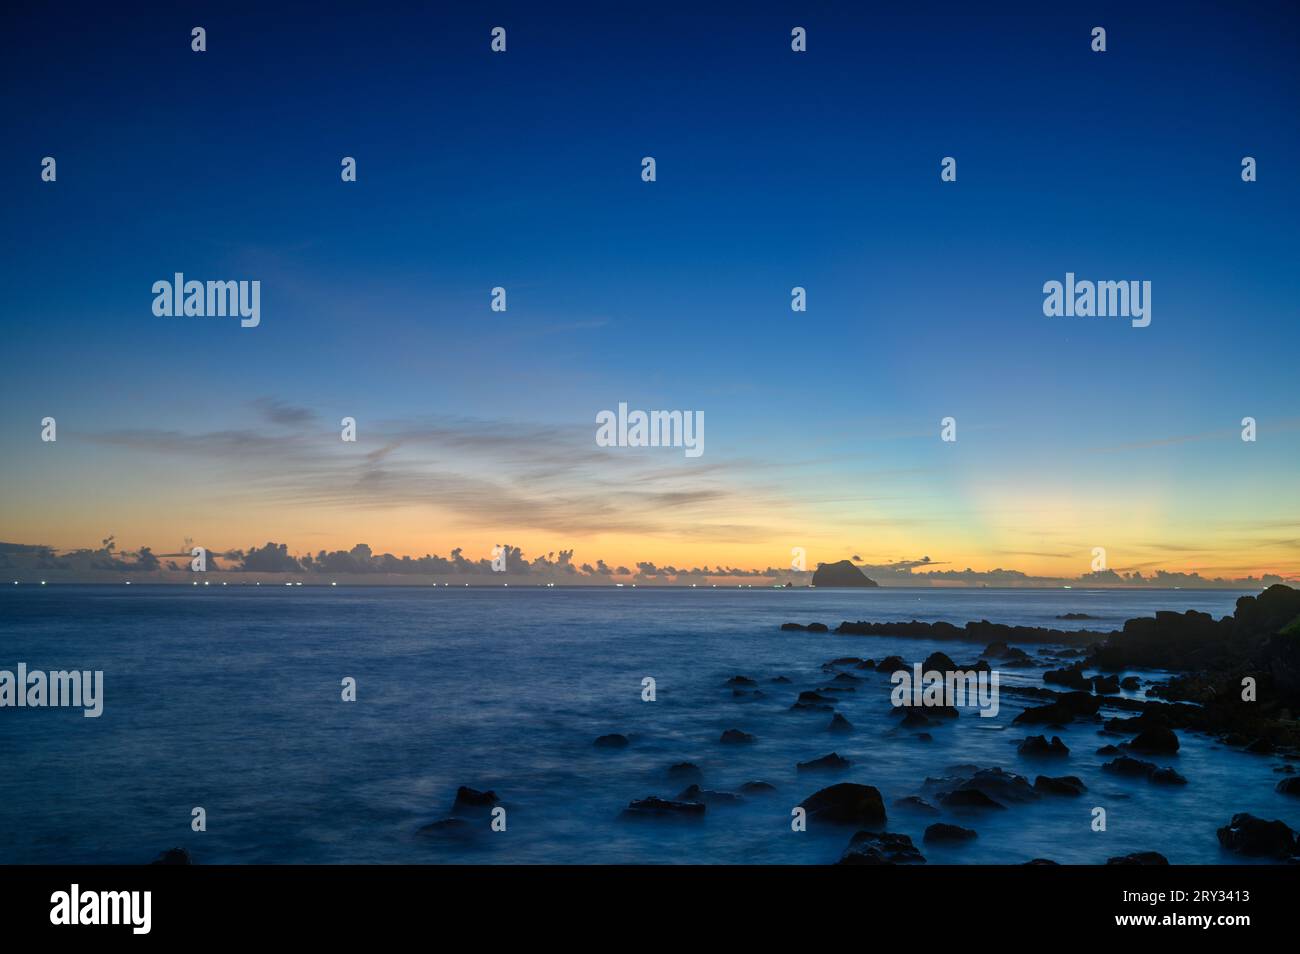 Dawn's Embrace: Sunburst and Rocky Shoreline at the Beach. Enjoy the sunrise view of Keelung Island in the early morning. Stock Photo